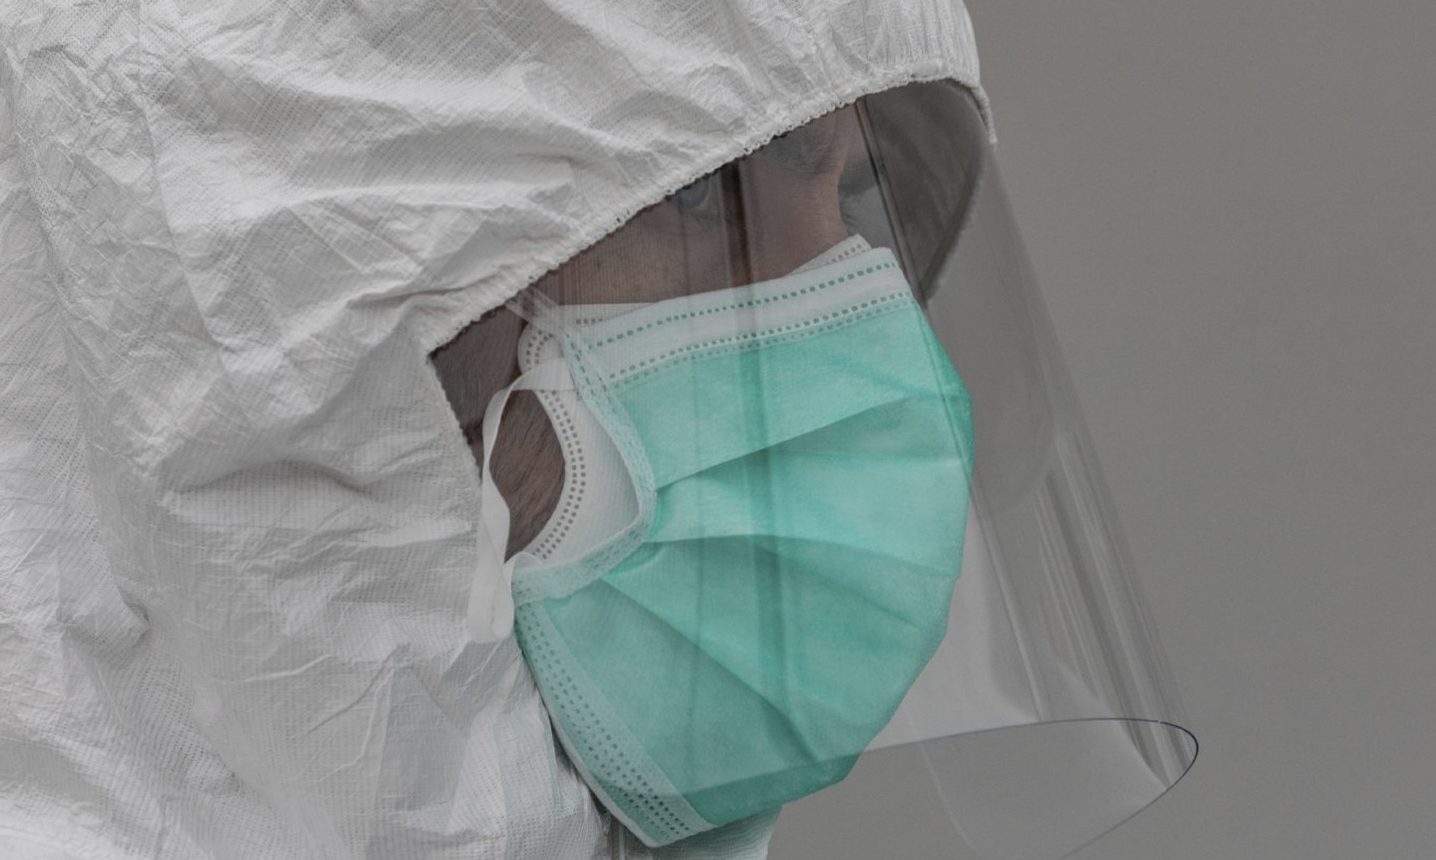 A healthcare worker wears protective gear during the coronavirus outbreak in Madrid, Spain.